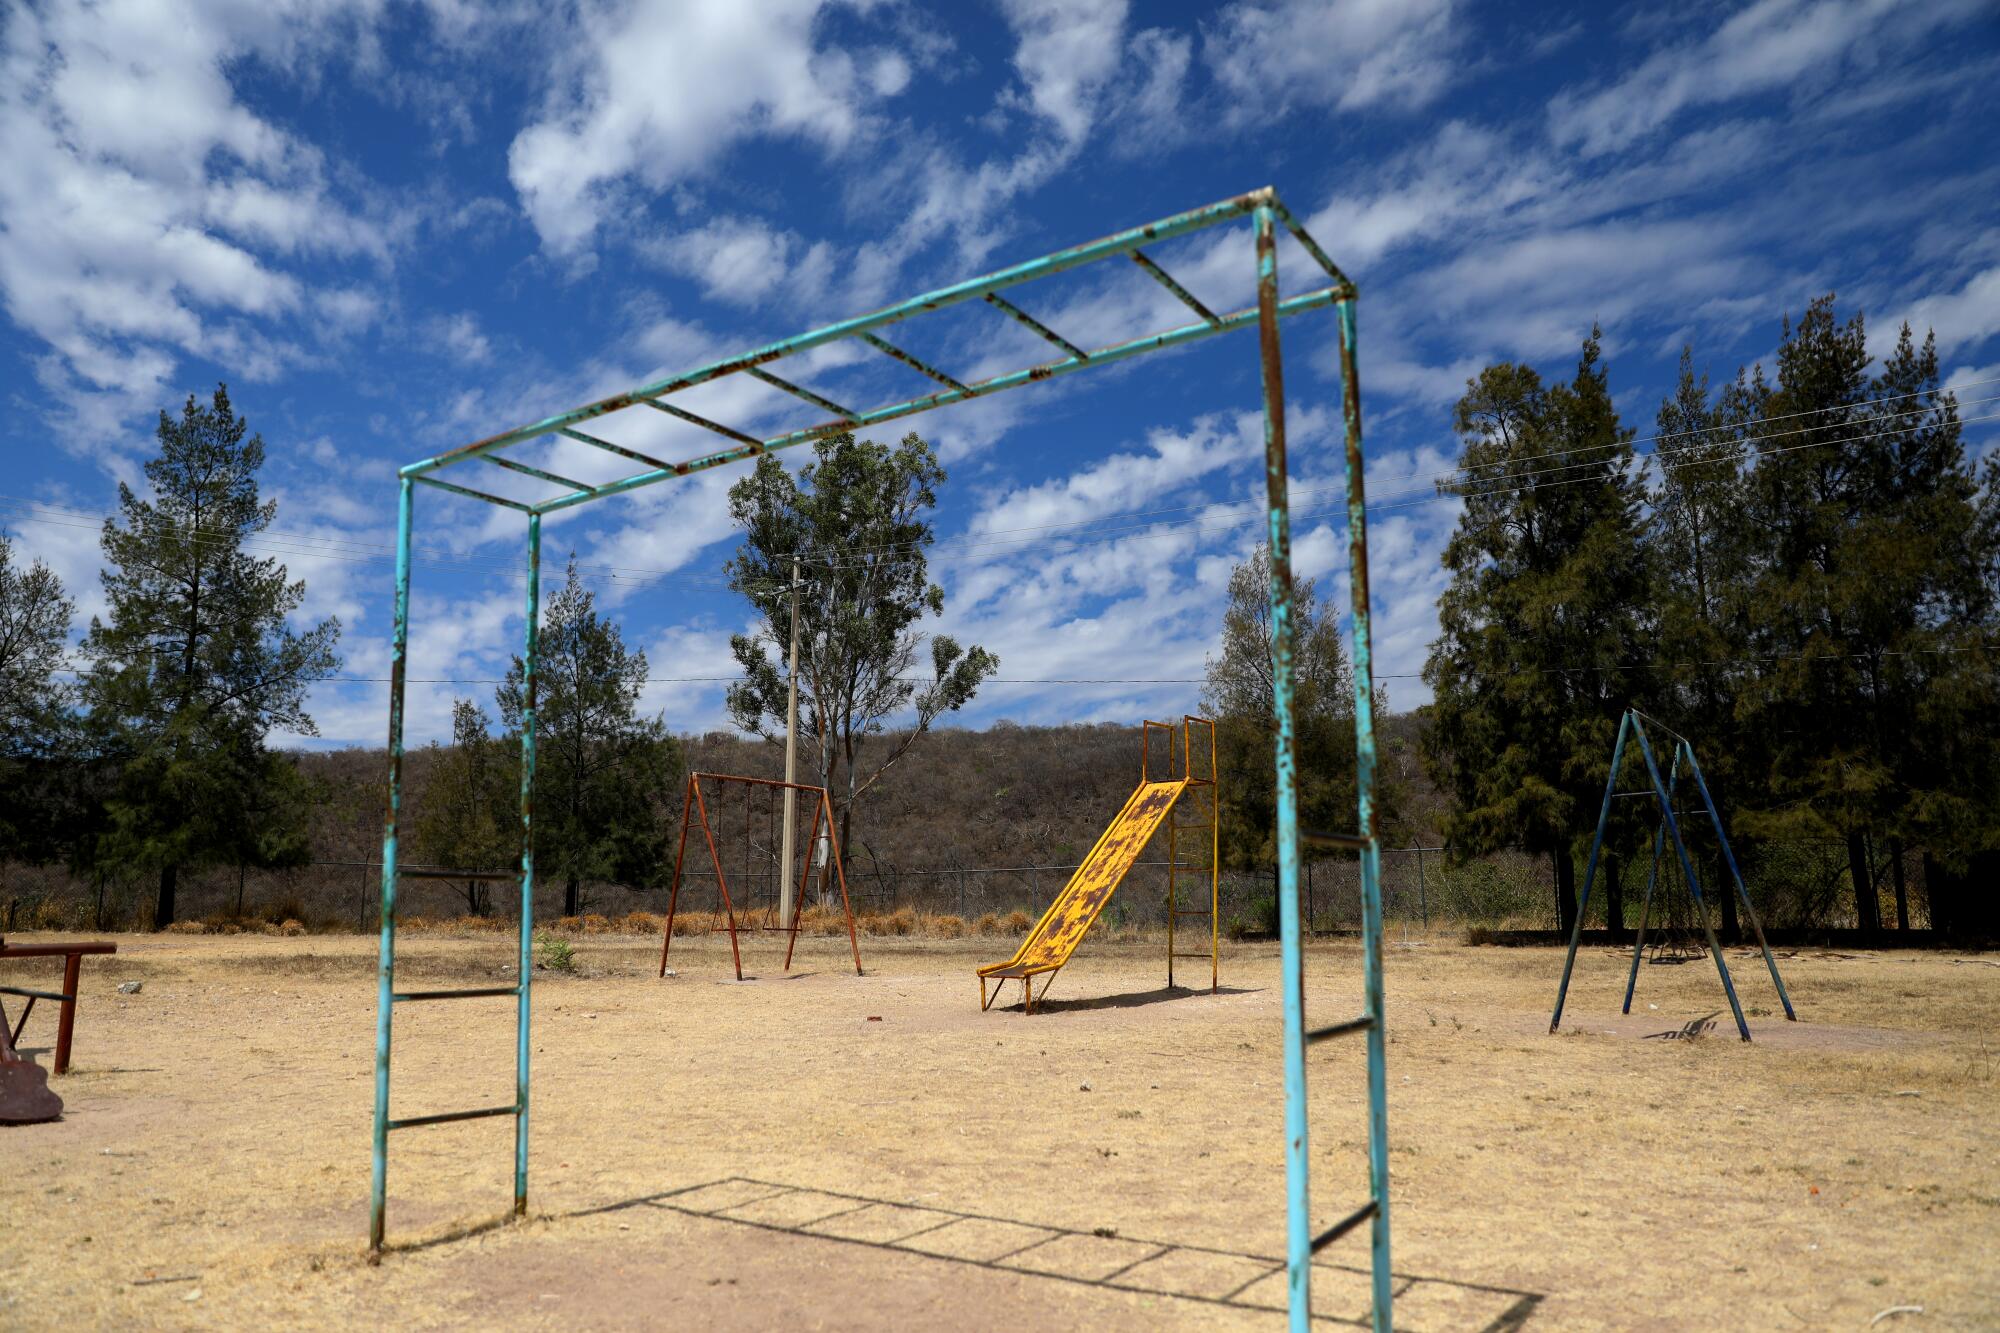 Unused and rusted playground equipment stands in the dust in rural Zacatecas, Mexico. 